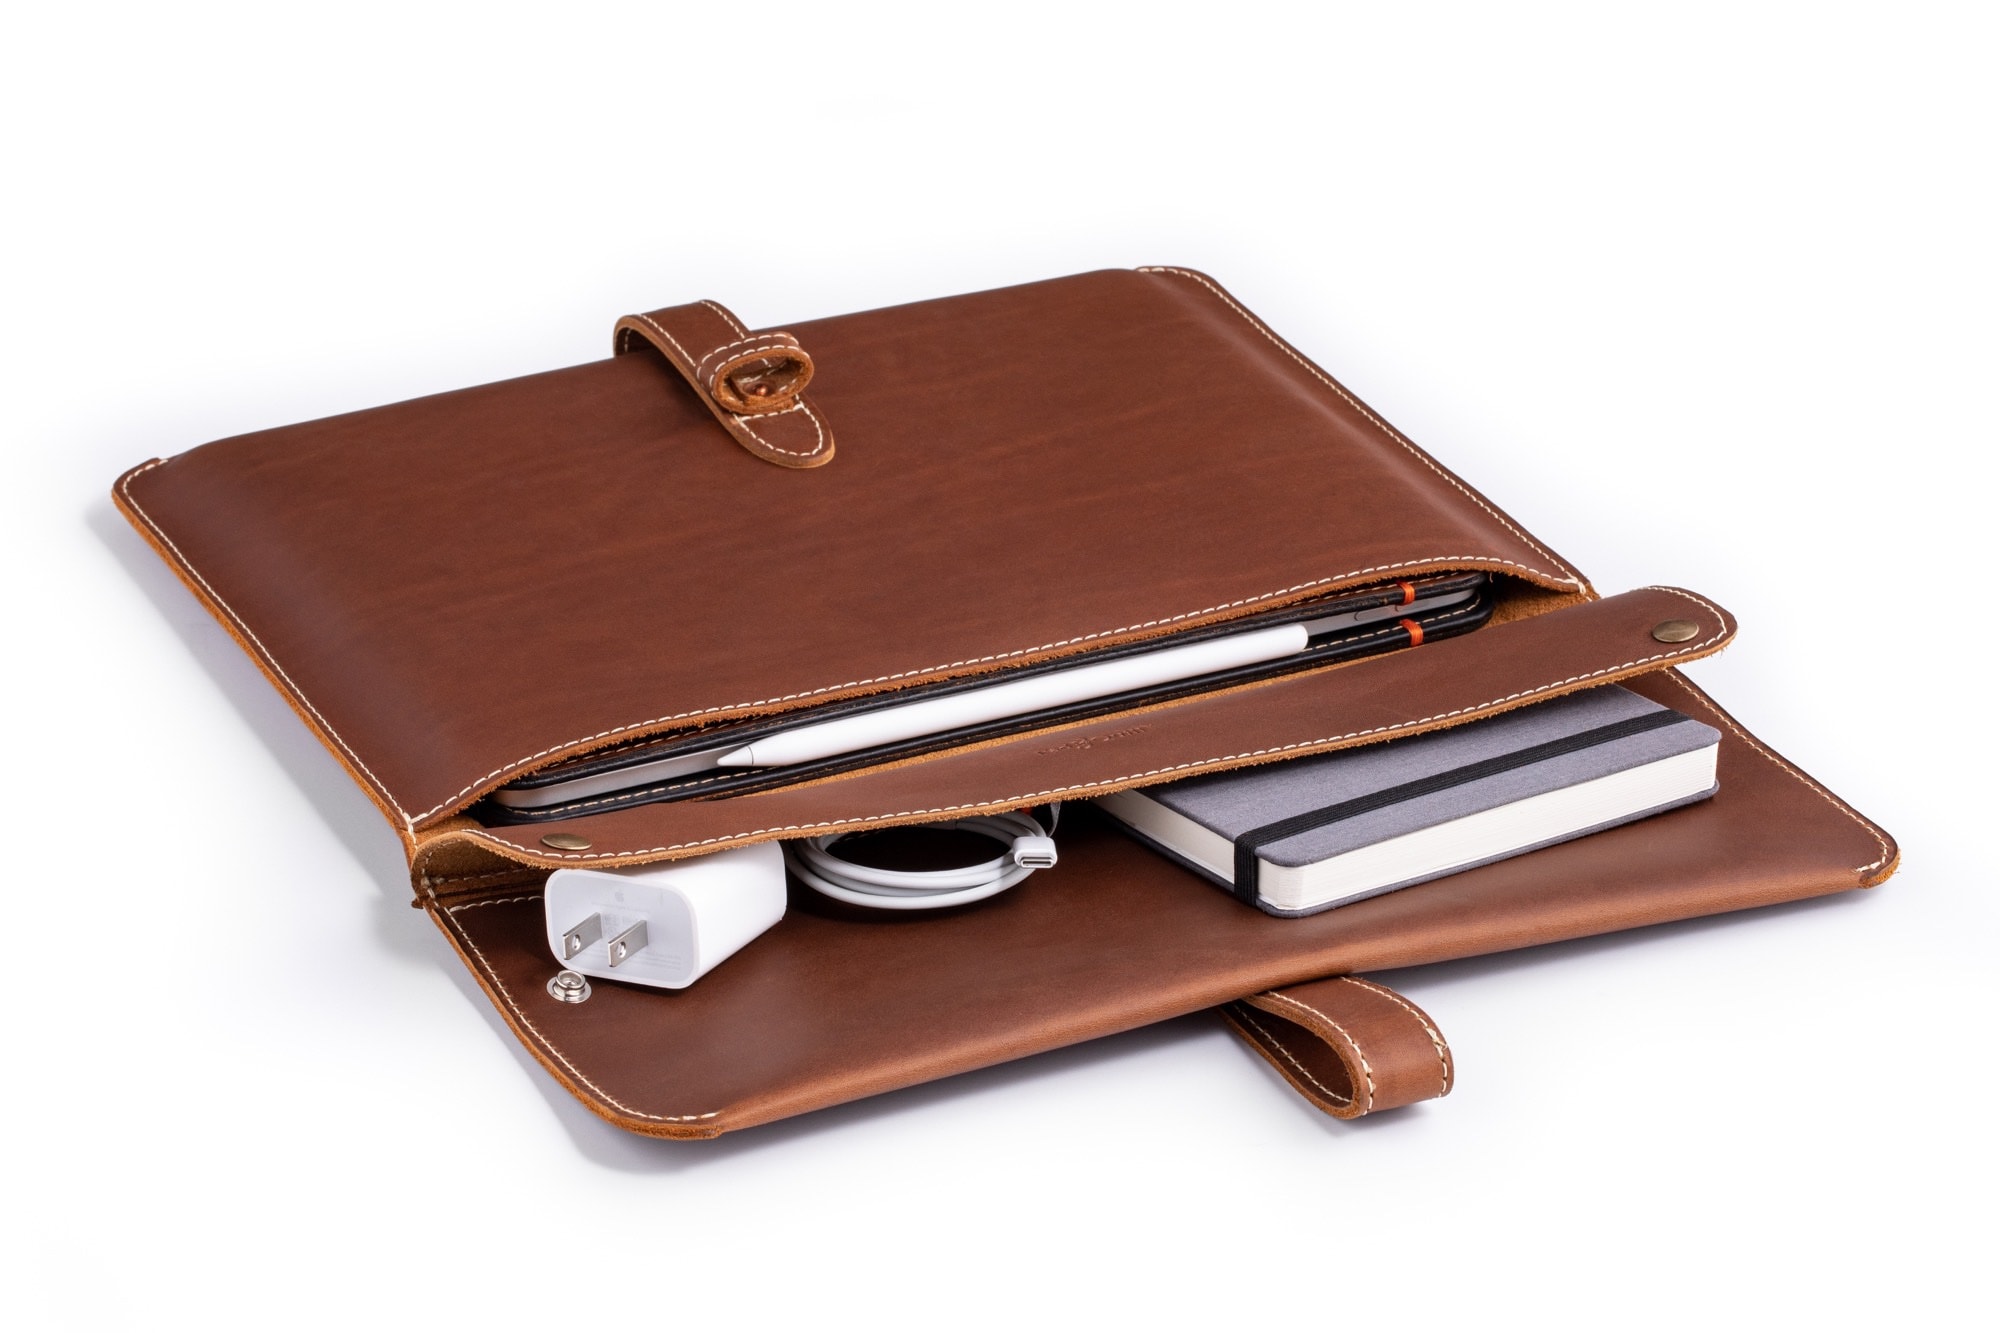 Both the main section and the pocket remain accessible when the Oxford iPad Sleeve sits flat on the desk.